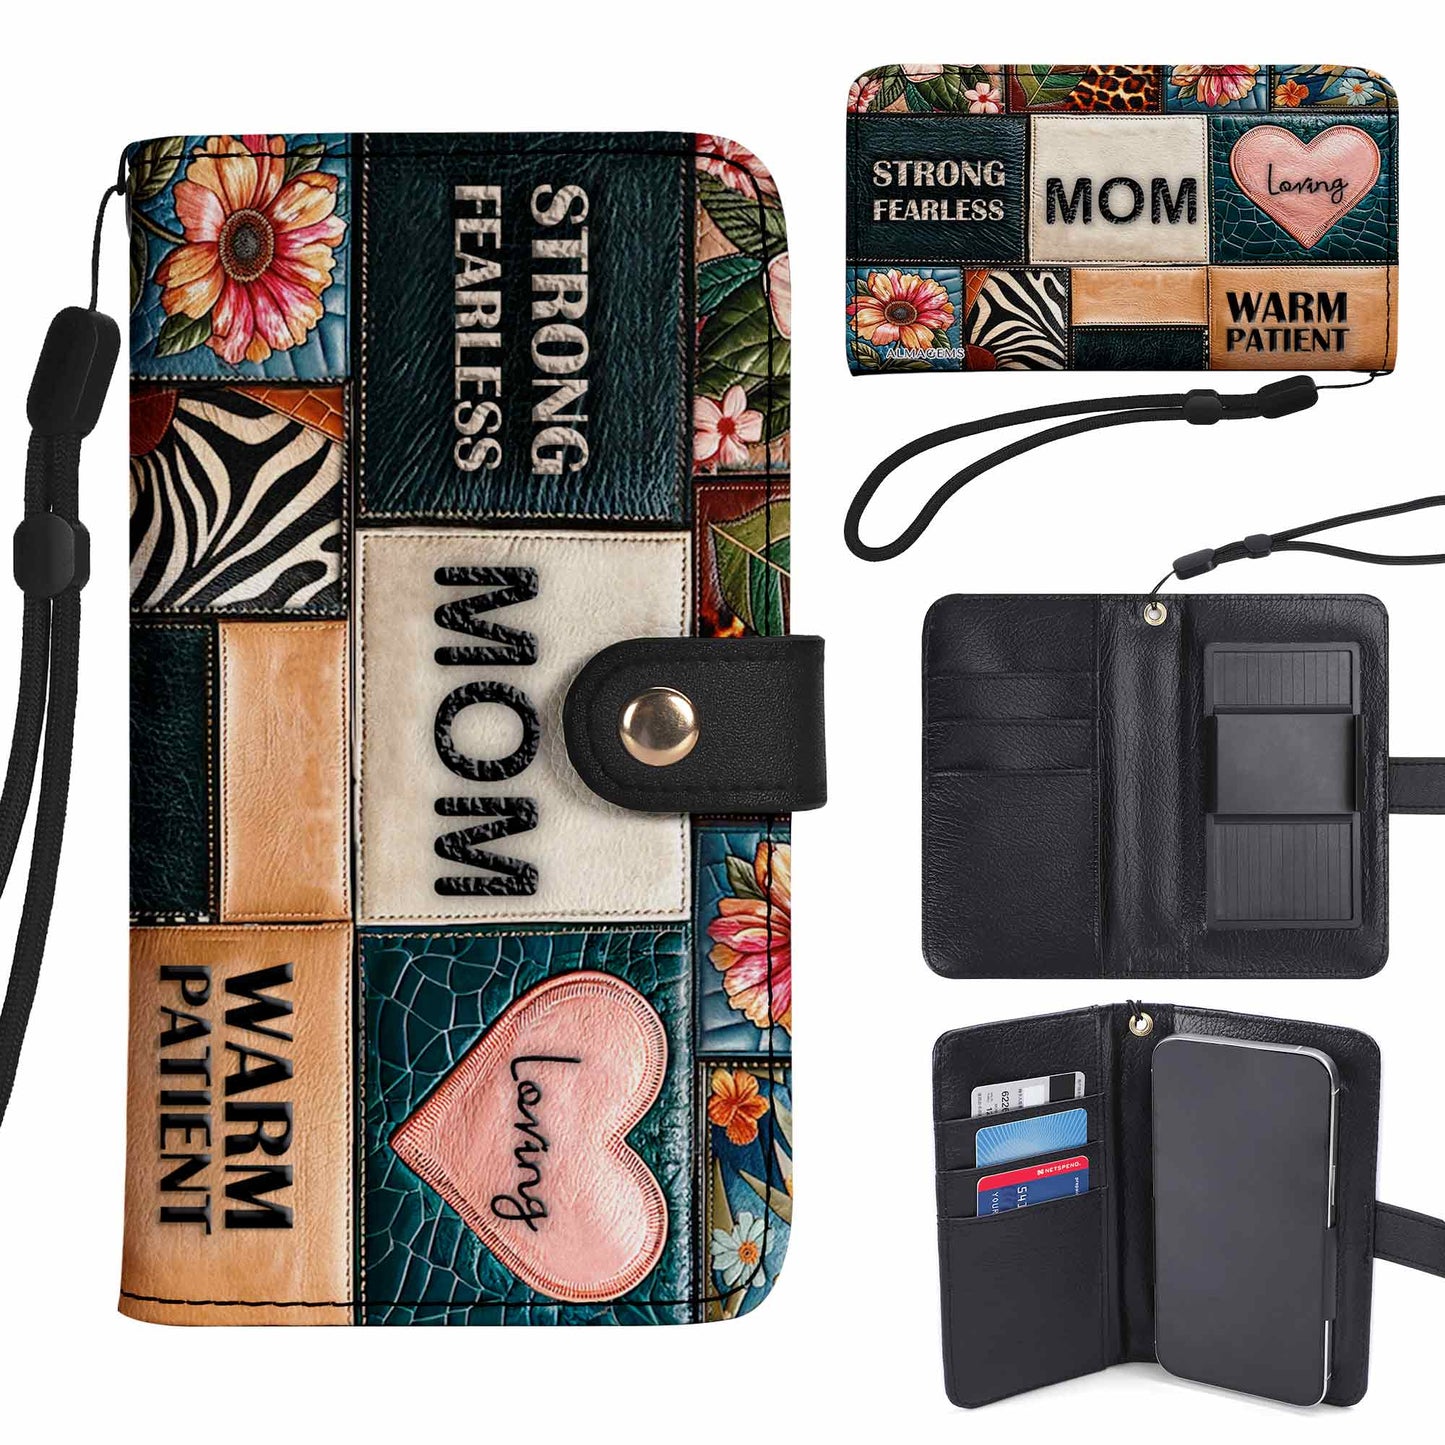 MOM - Bespoke Phone Leather Wallet - MM13PW